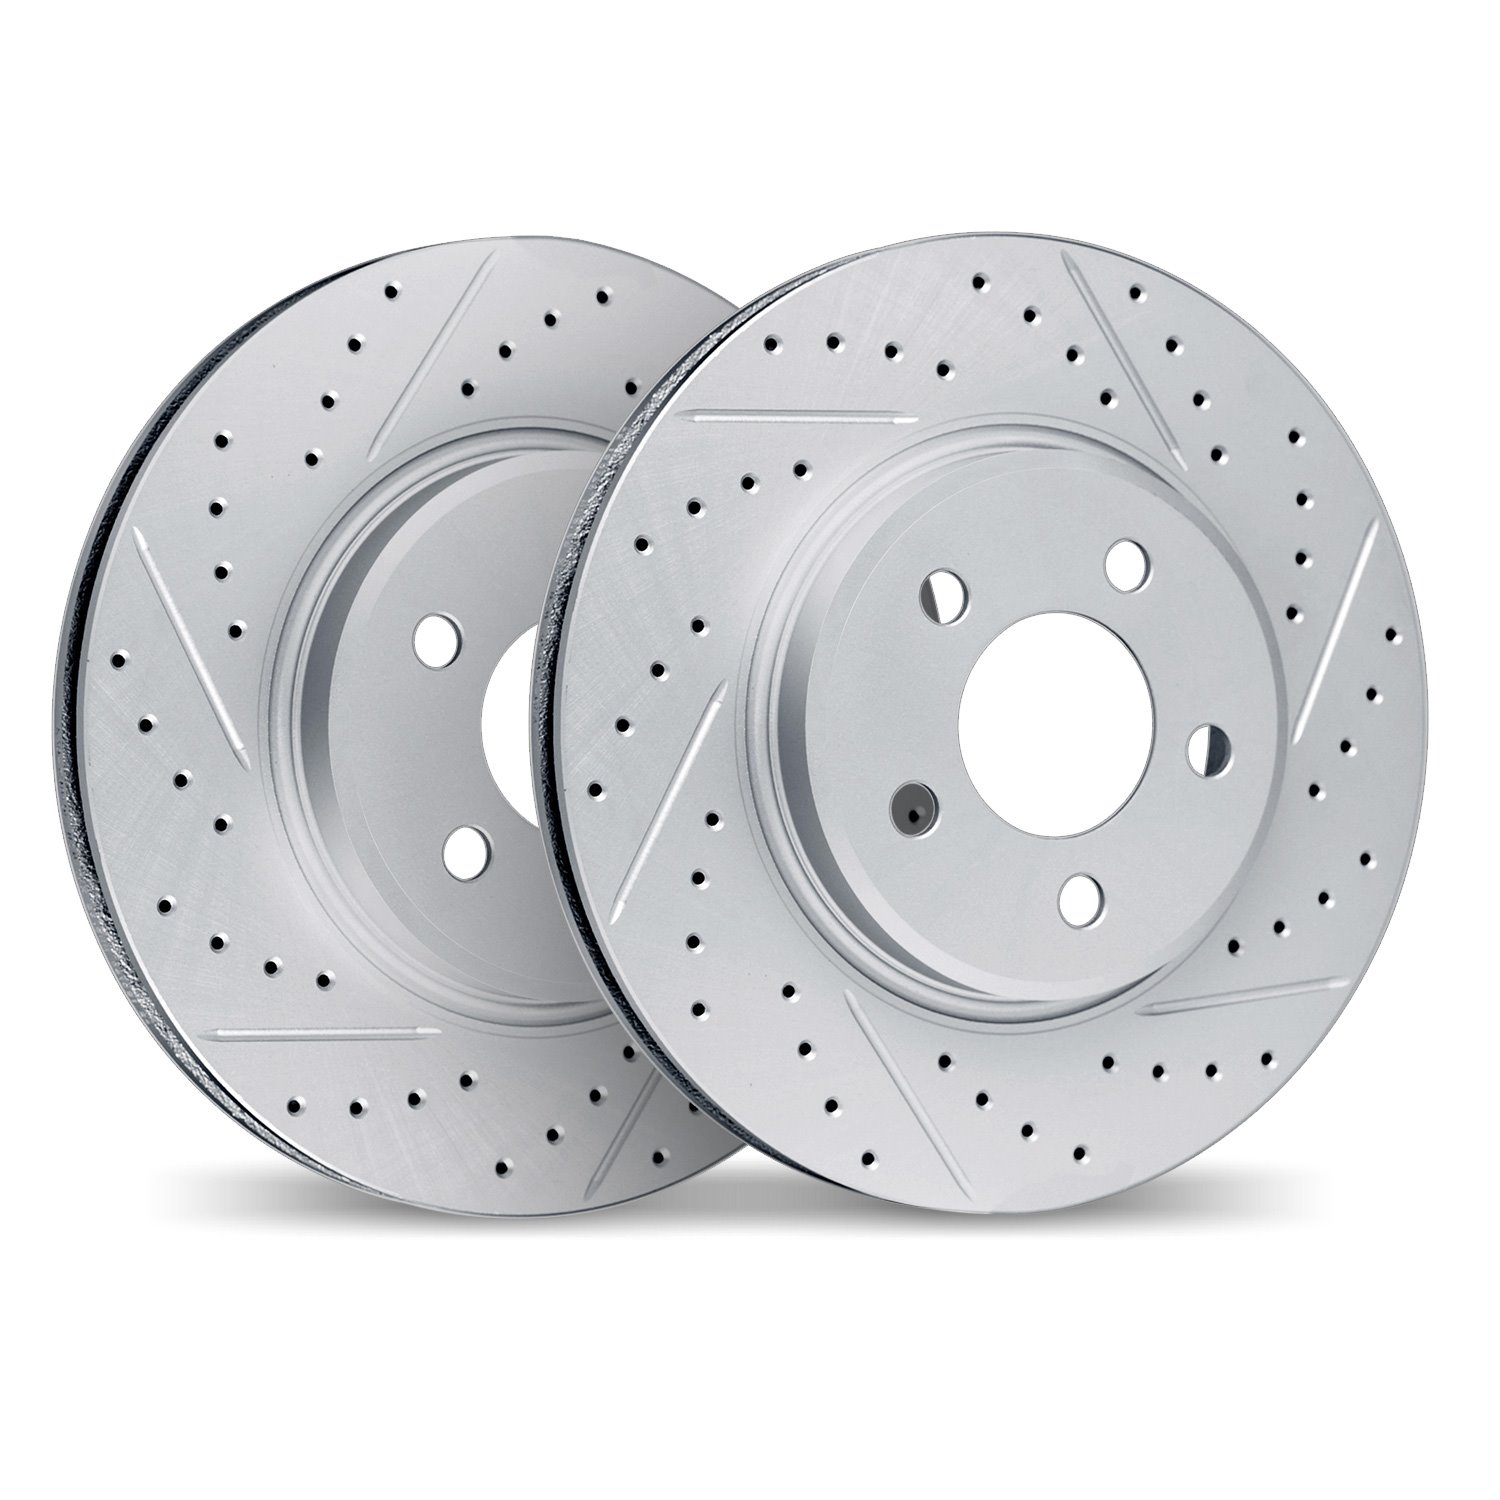 2002-63034 Geoperformance Drilled/Slotted Brake Rotors, Fits Select Mercedes-Benz, Position: Front